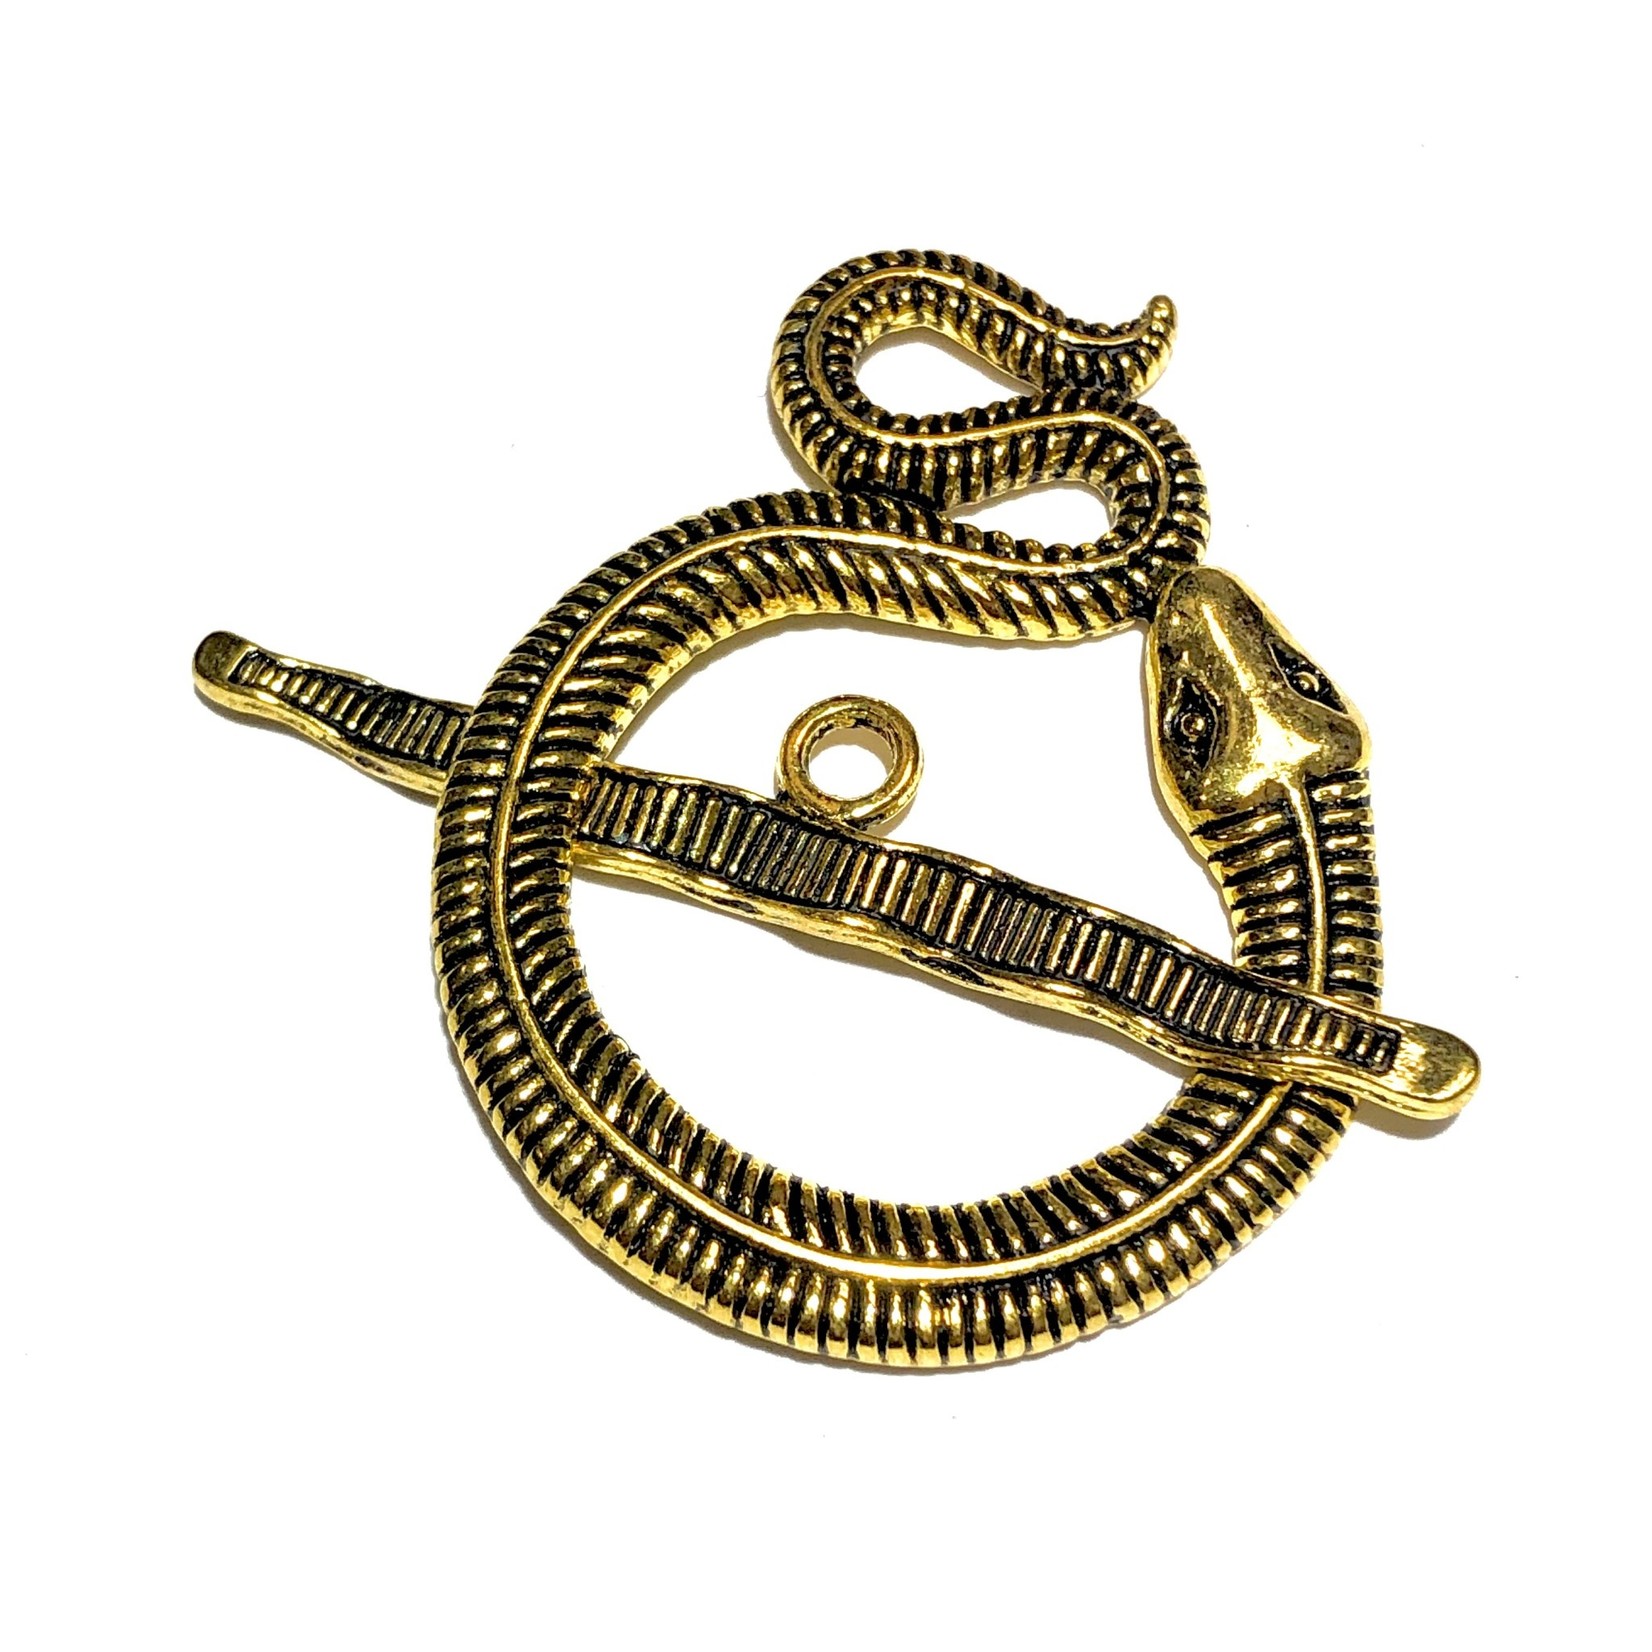 Tibetan Gold Alloy 46mm Snake Toggle Clasp